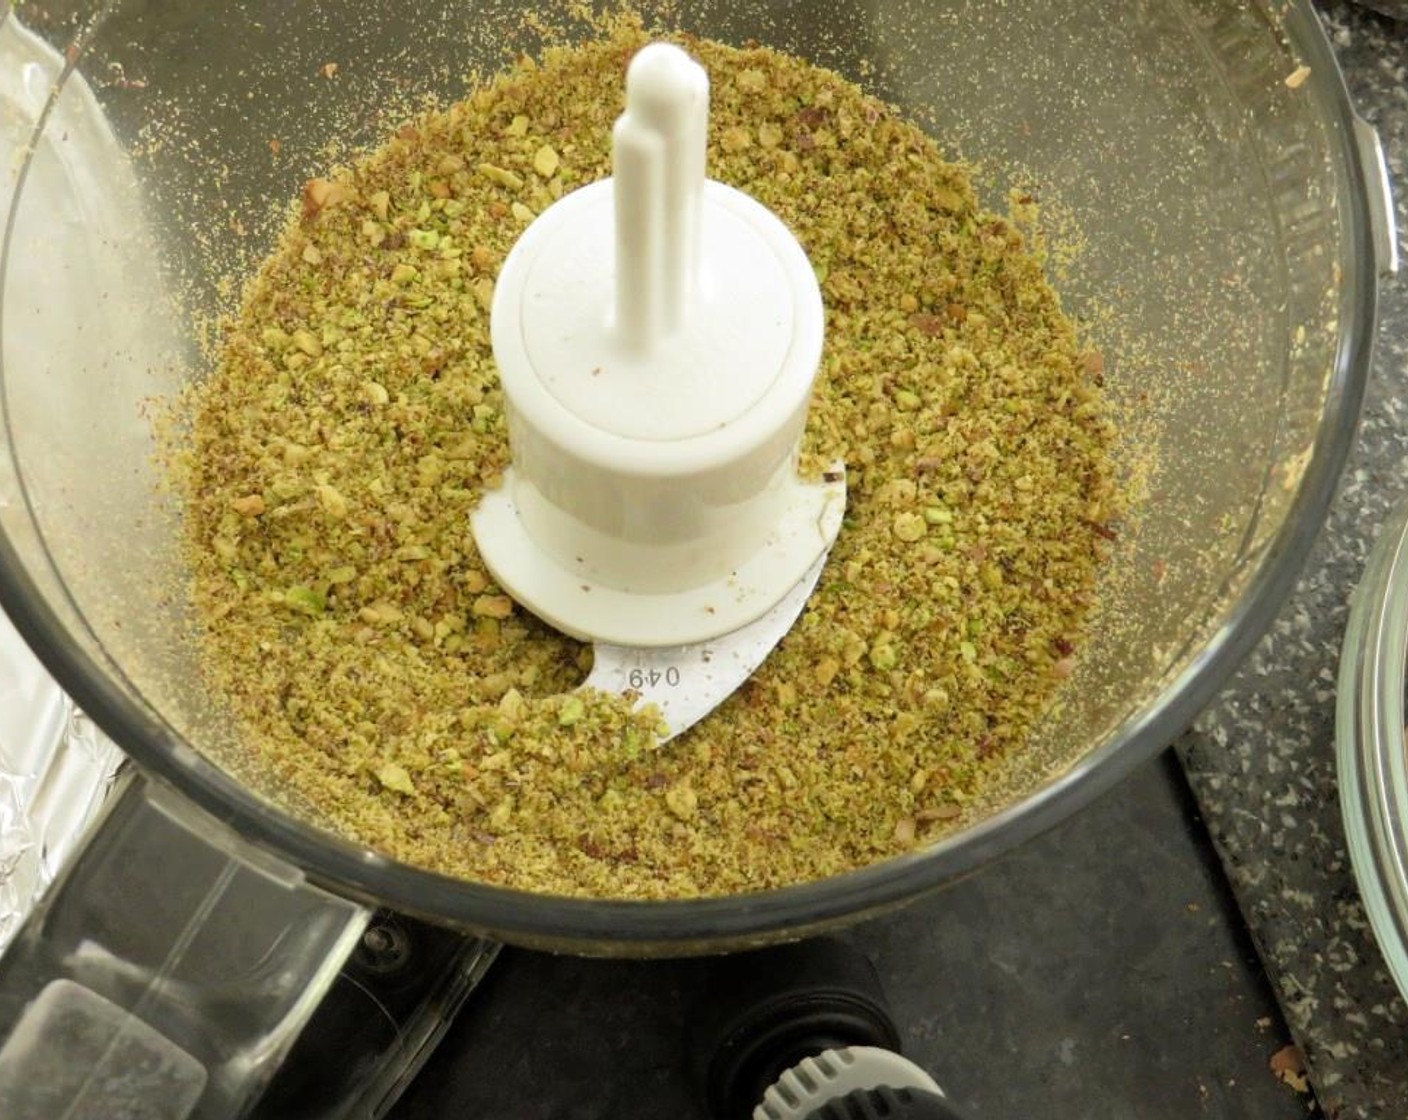 step 3 Using a food processor, pulse Shelled Unsalted Pistachios (3/4 cup) until finely ground, about 40 seconds. Add All-Purpose Flour (1 cup), Baking Powder (1/2 Tbsp), Ground Cardamom (1 tsp), and Salt (1/4 tsp). Pulse a few times to combine.